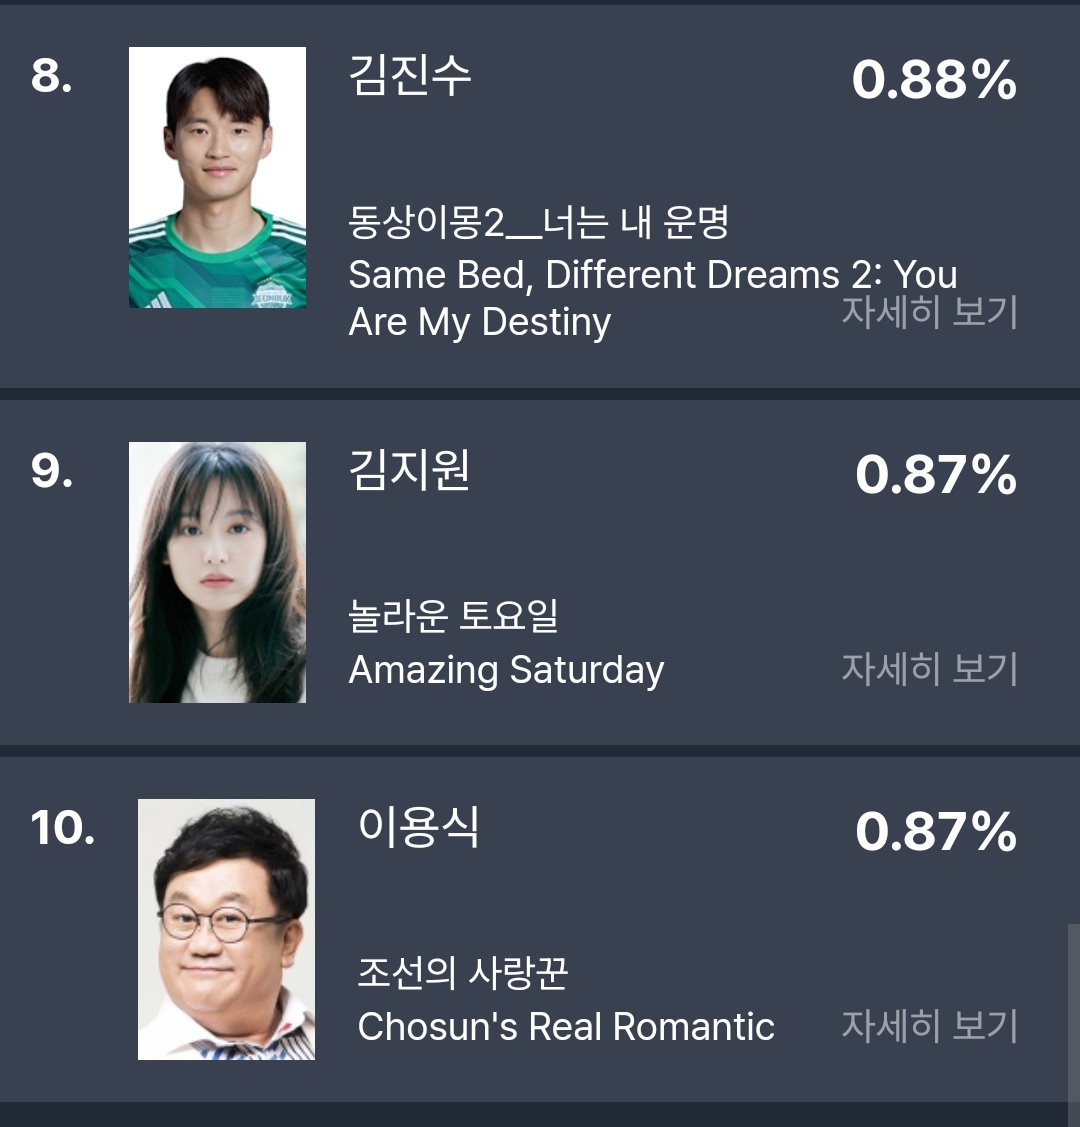 queen #kimjiwon ranked 1st for two consecutive weeks for gooddata's most buzzworthy actors 😭👏🏼

also ranked no.9 on the variety category
damn i'm so proud 👏🏼
#queenoftears